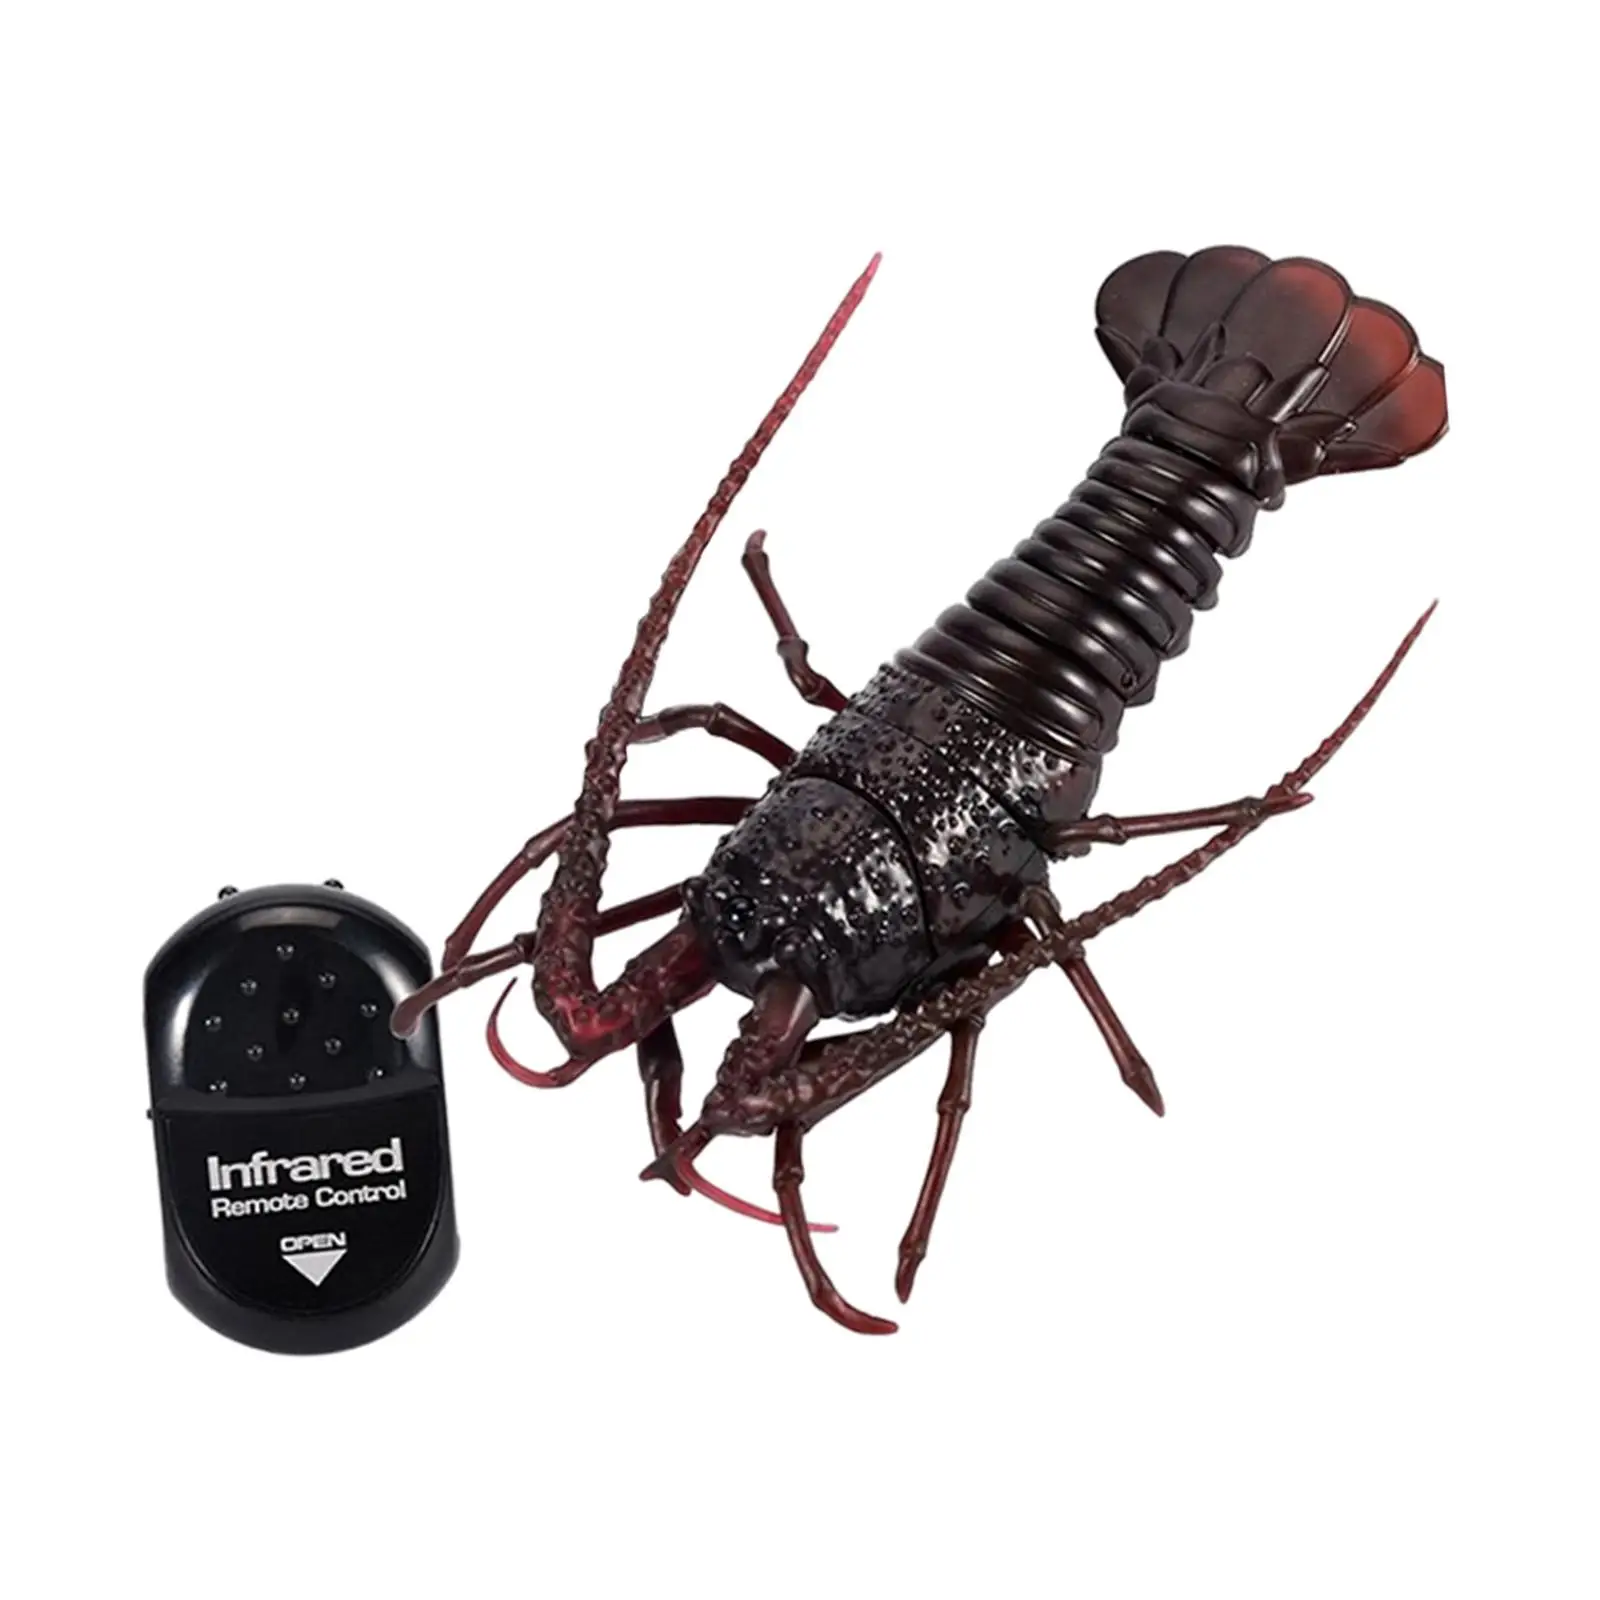 RC Remote Control Simulation Crawfish Pet Model Electric Infrared RC Shrimp for Girls Boys Toddler Kids Children Birthday Gifts